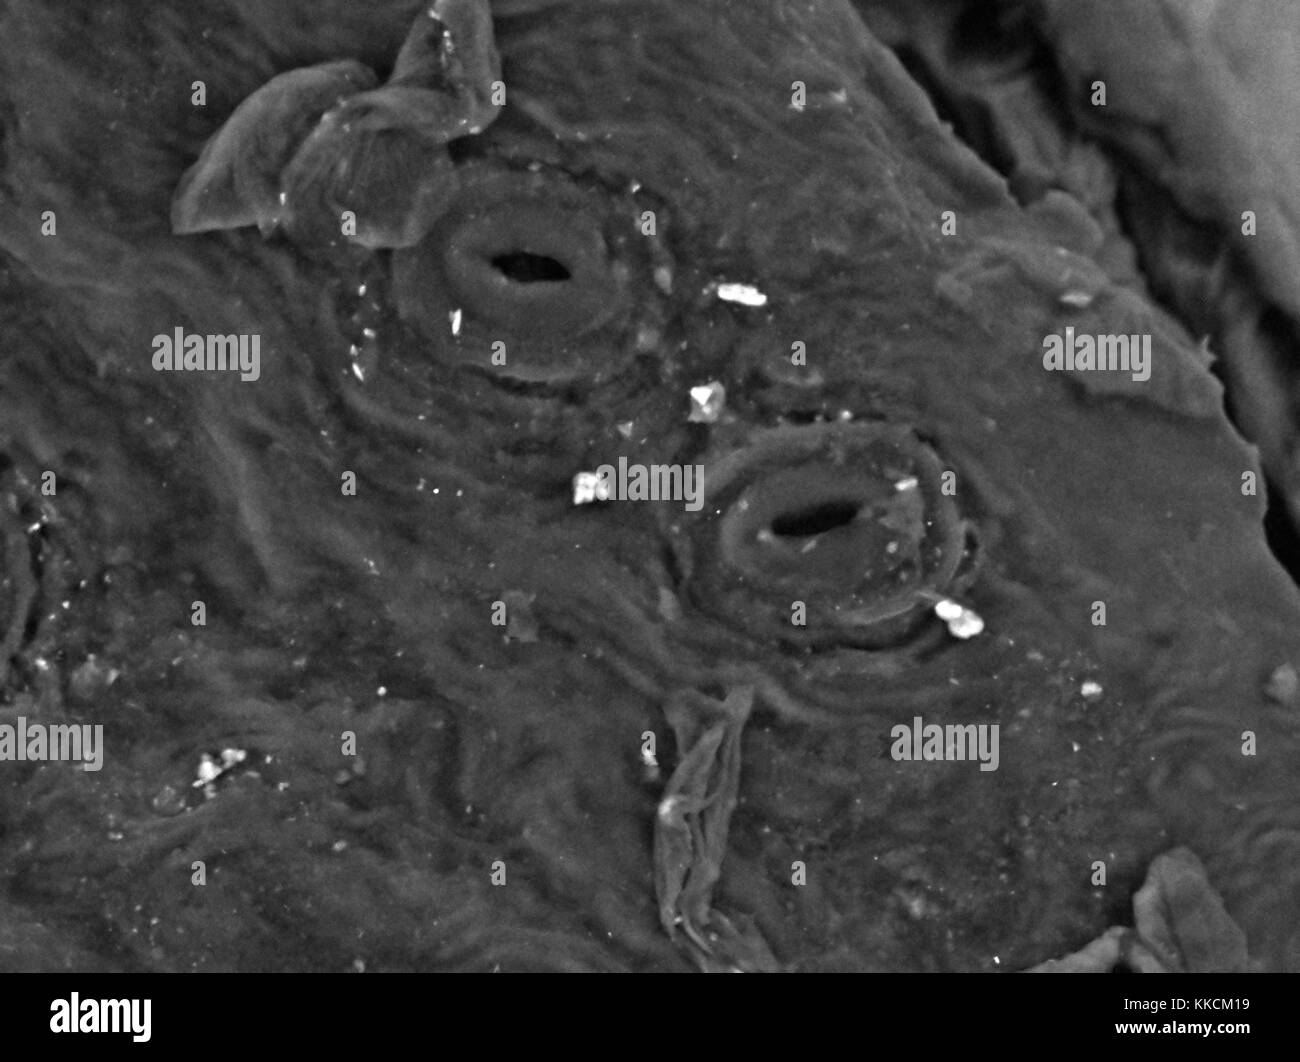 Scanning electron microscope (SEM) micrograph showing two open stomata (gas exchange pores) on the underside of a common ivy (Hedera helix) leaf, at a magnification of 1, 500x. The random distribution of stomata is typical of the dicot plant group, of which hedera helix is a member, 2016. Stock Photo